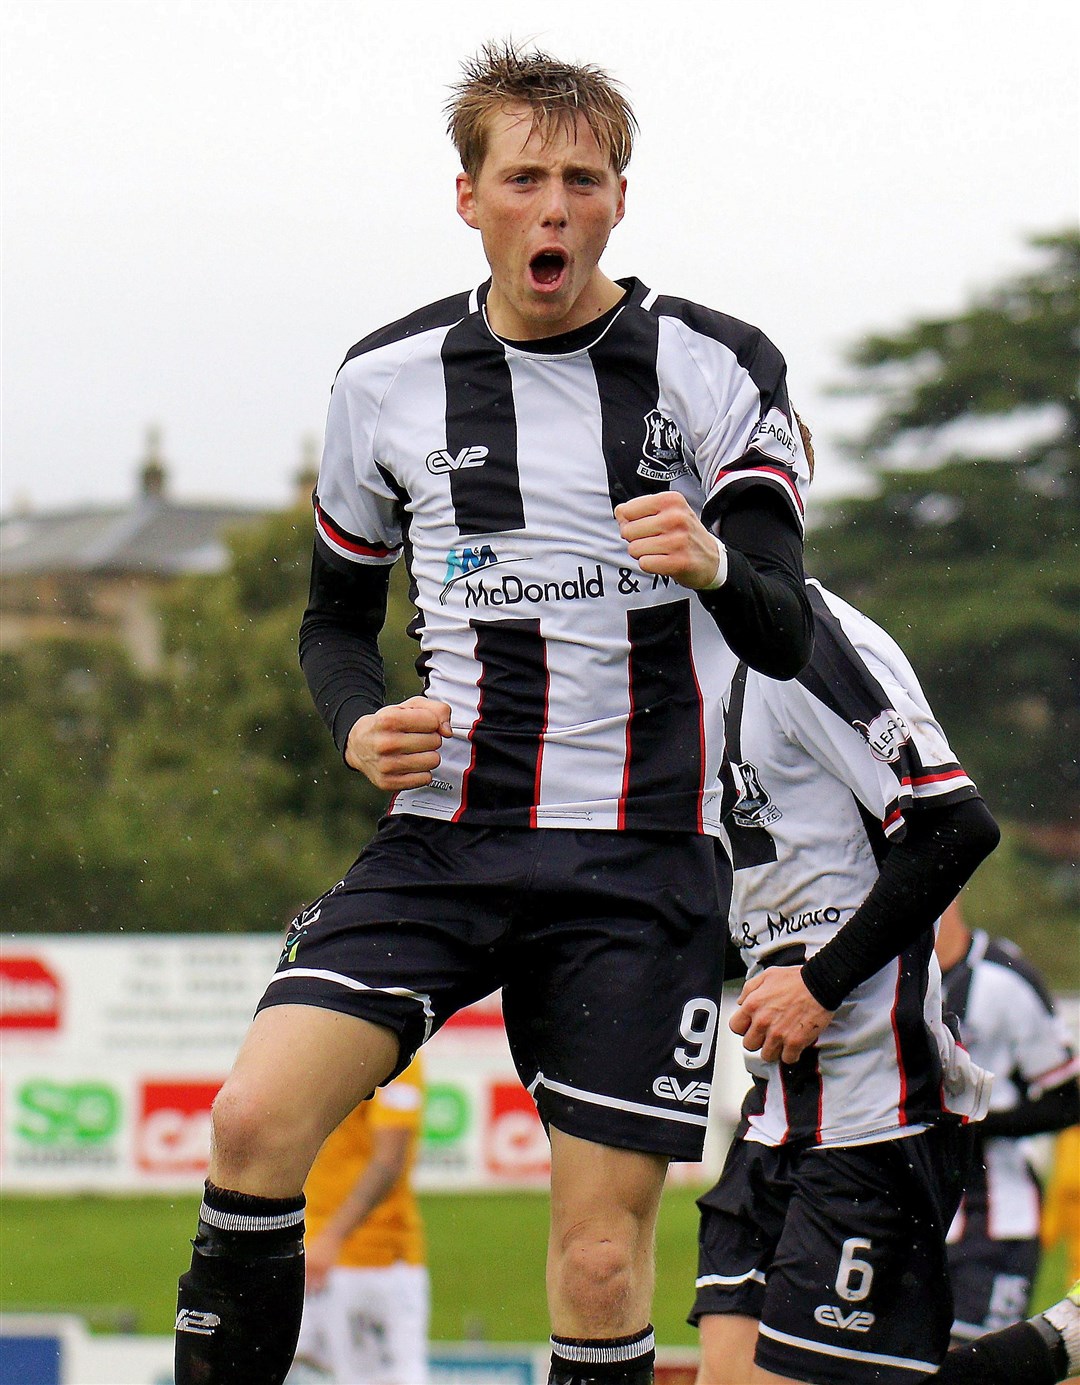 Hester celebrates a goal against Edinburgh City in his first year at Elgin City.